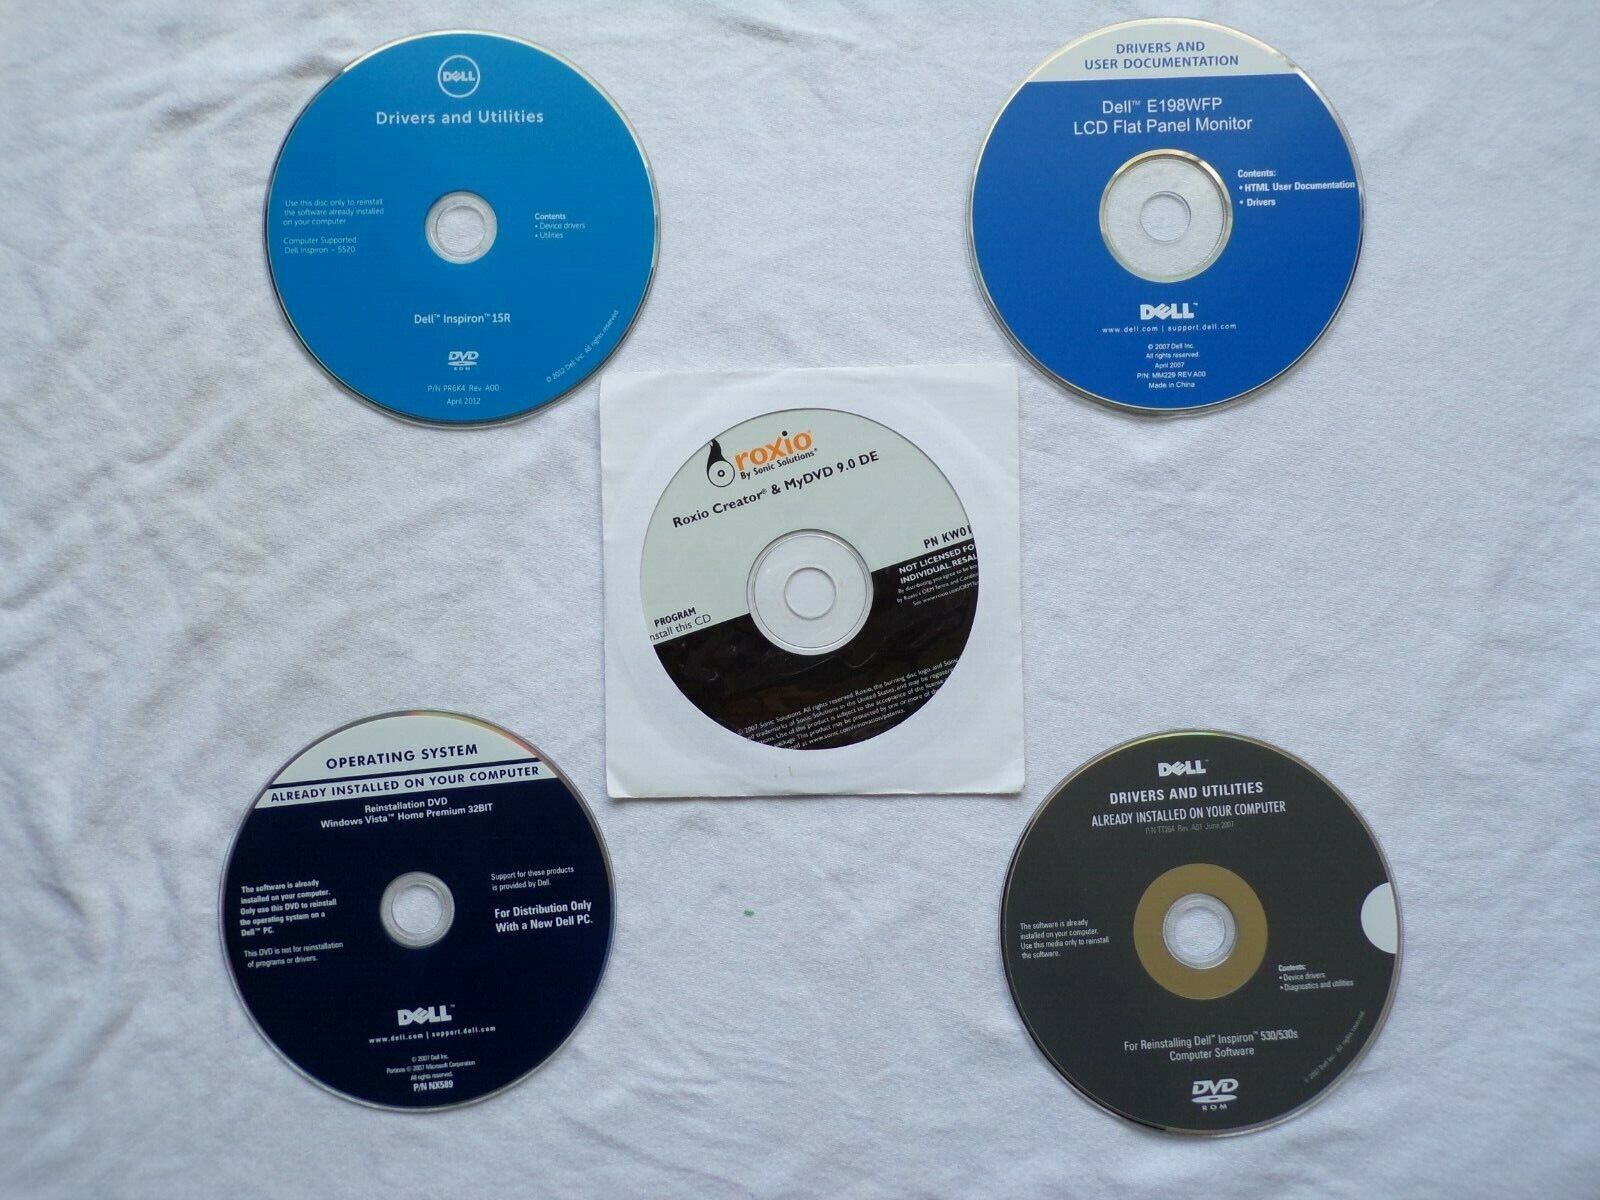 Dell Lot of  Drivers and Utilities System Software CDs and 1 New Roxio CD  Dell